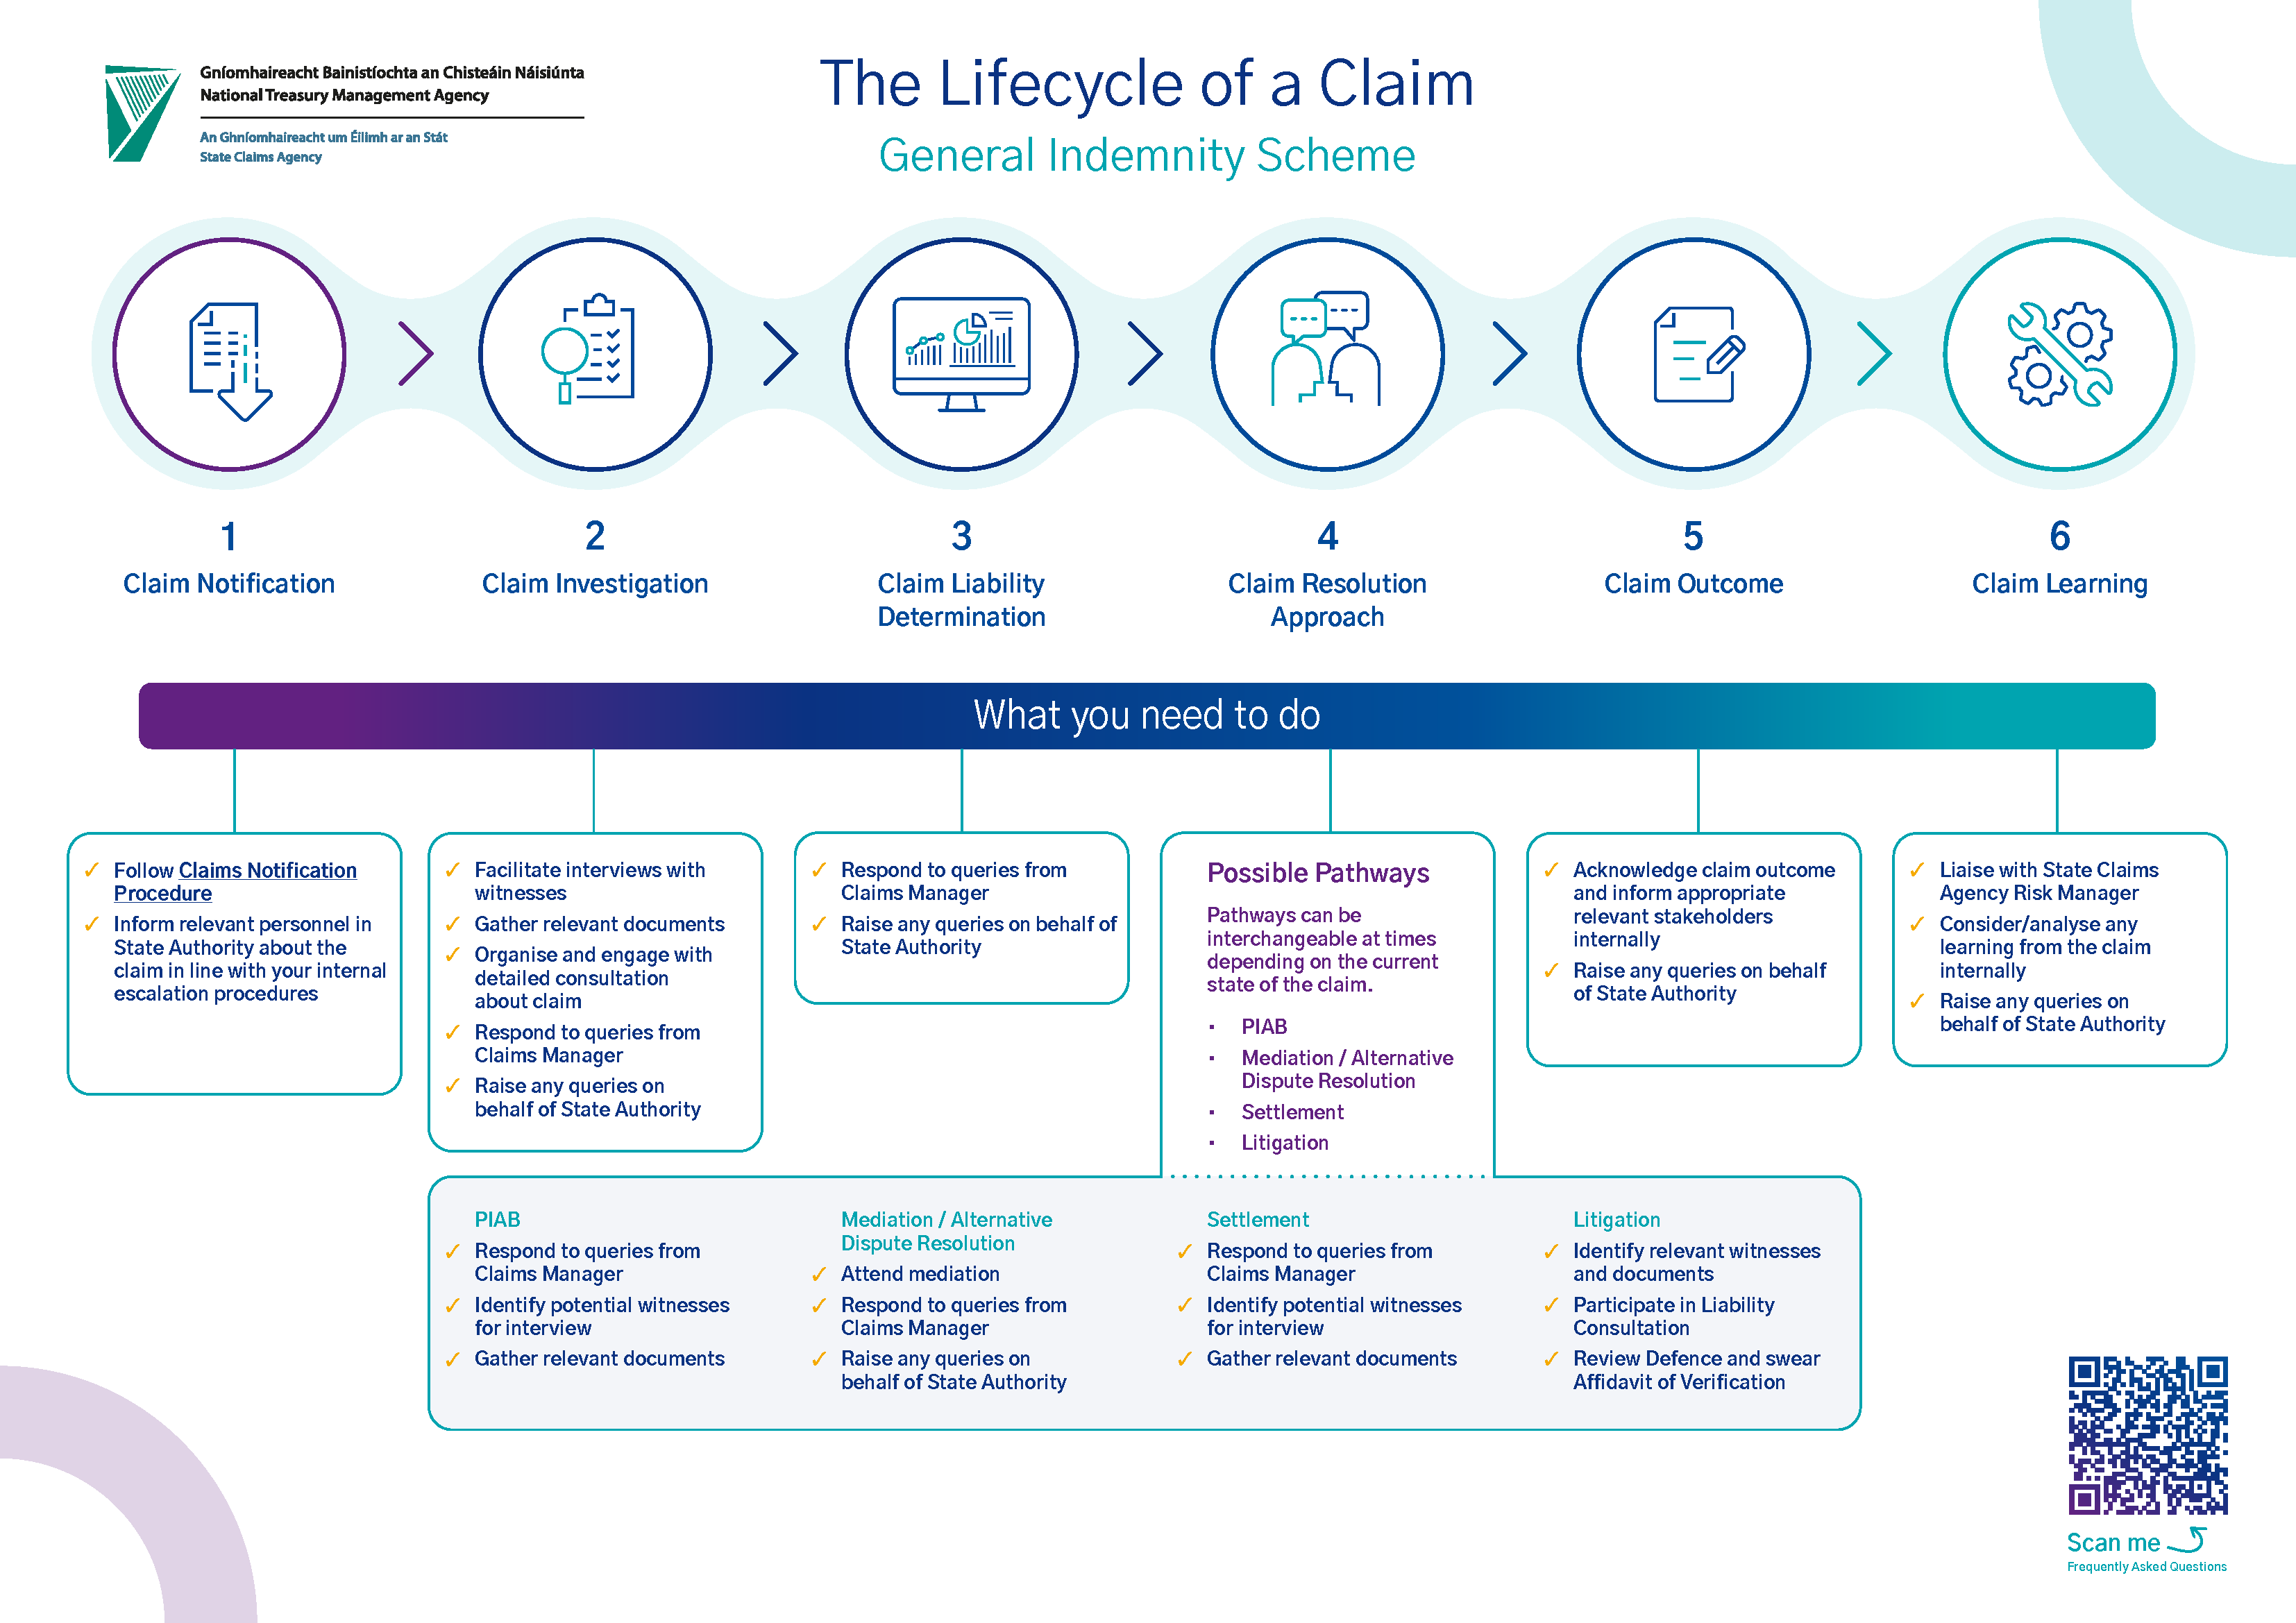 The Lifecycle of a Claim